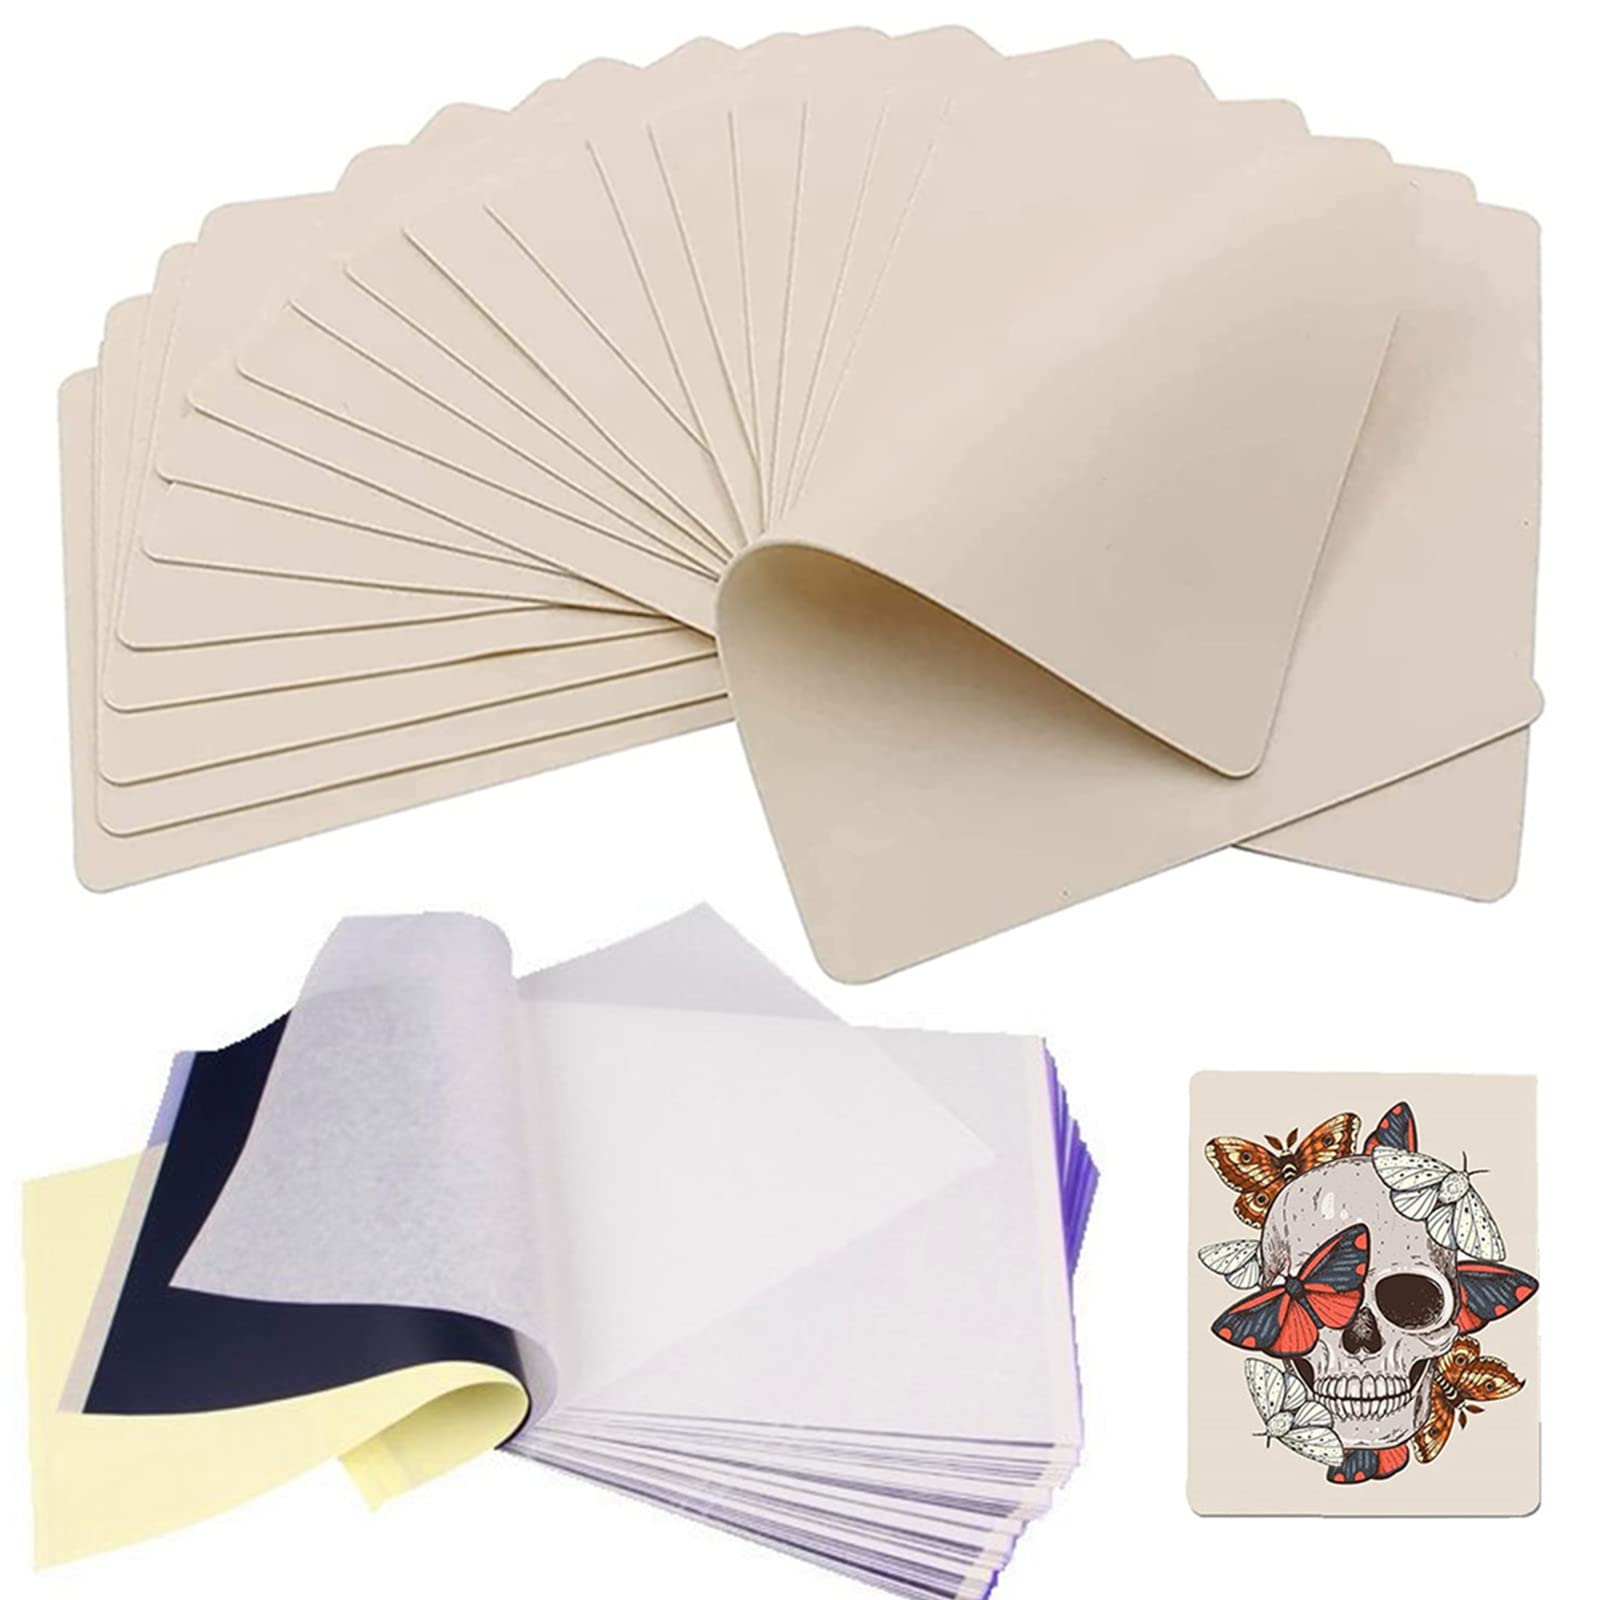 Yuelong 30Pcs Blank Tattoo Skin Practice with Transfer Paper, 15pcs Rubber Fake Skin 8X6"Double Sides and 10pcs Stencil Paper for Artist